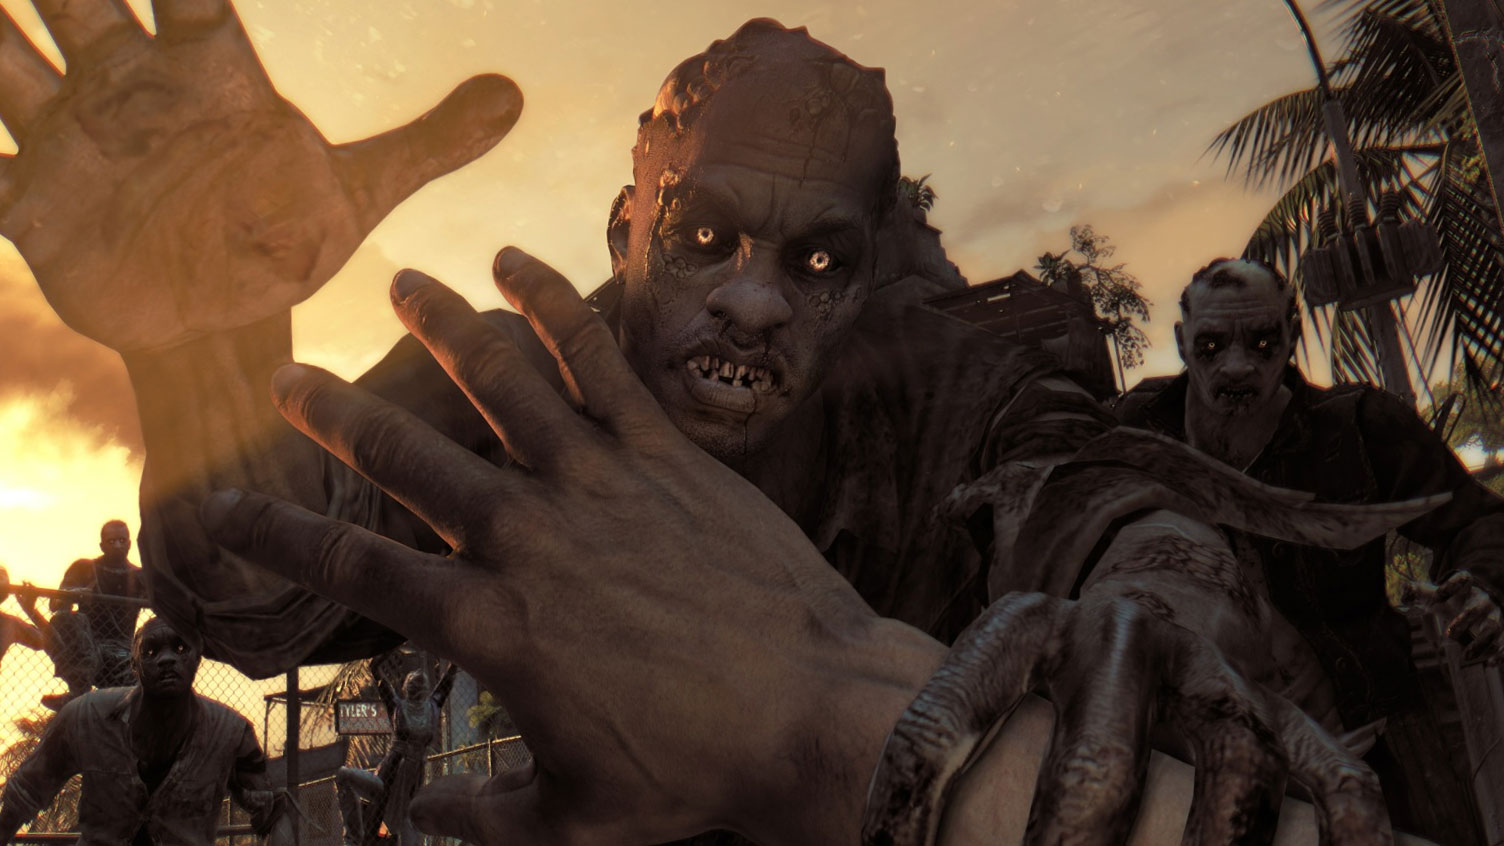 dying light trainer download